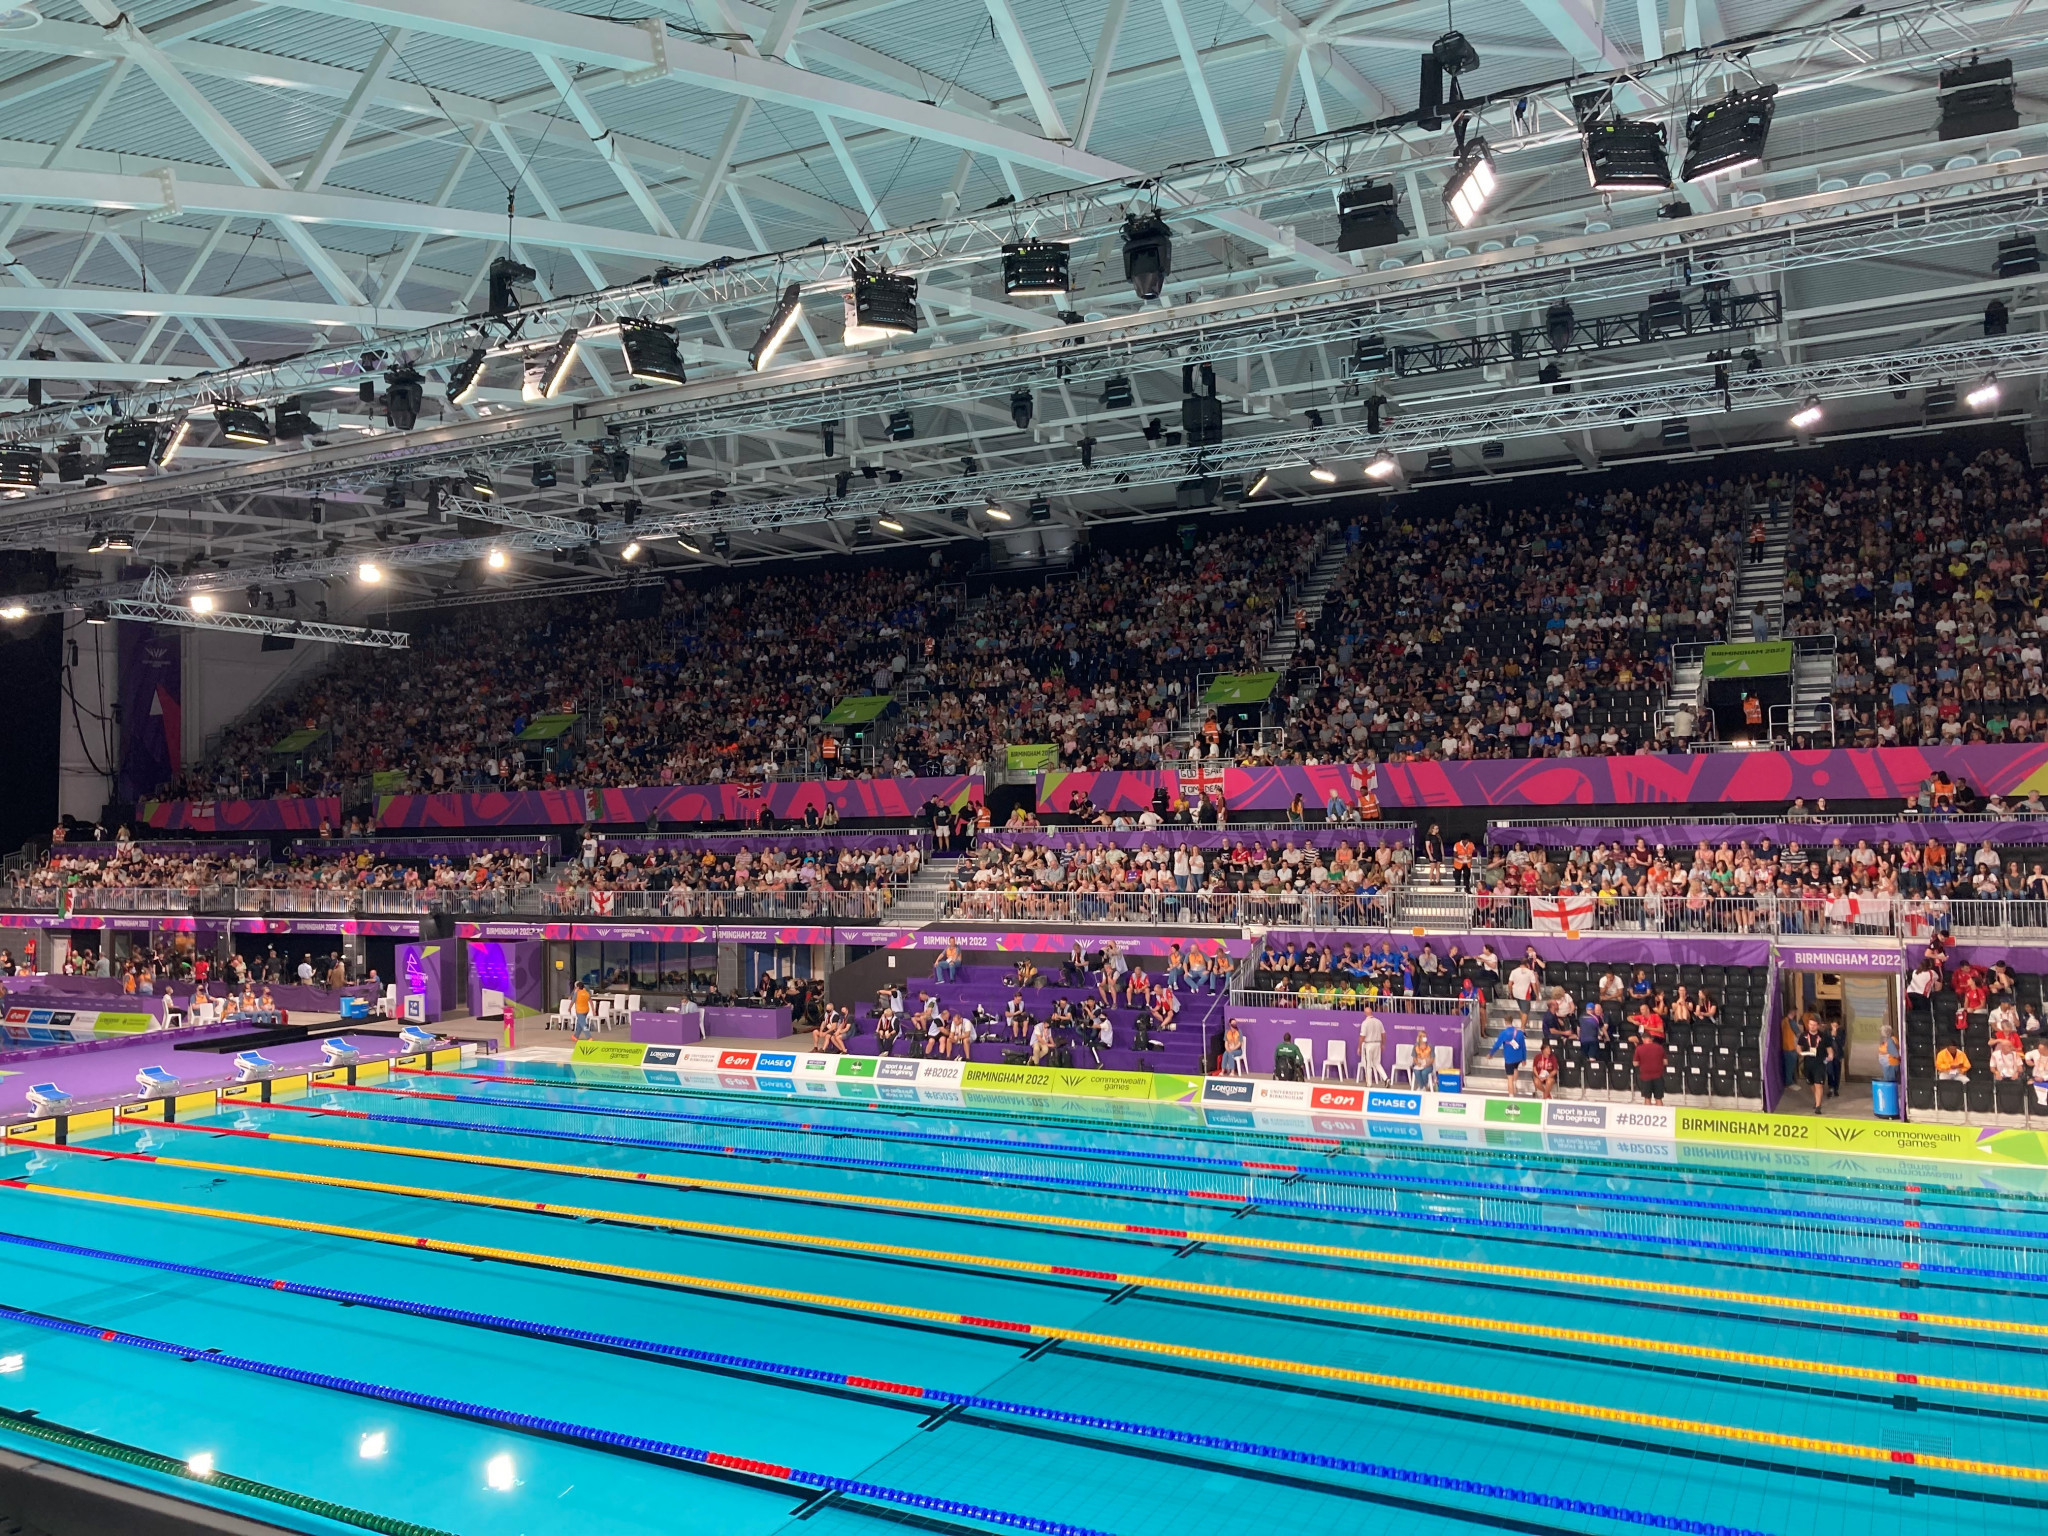 The newly-built Sandwell Aquatics Centre is set to benefit local communities and public after the Birmingham 2022 Commonwealth Games ©Getty Images